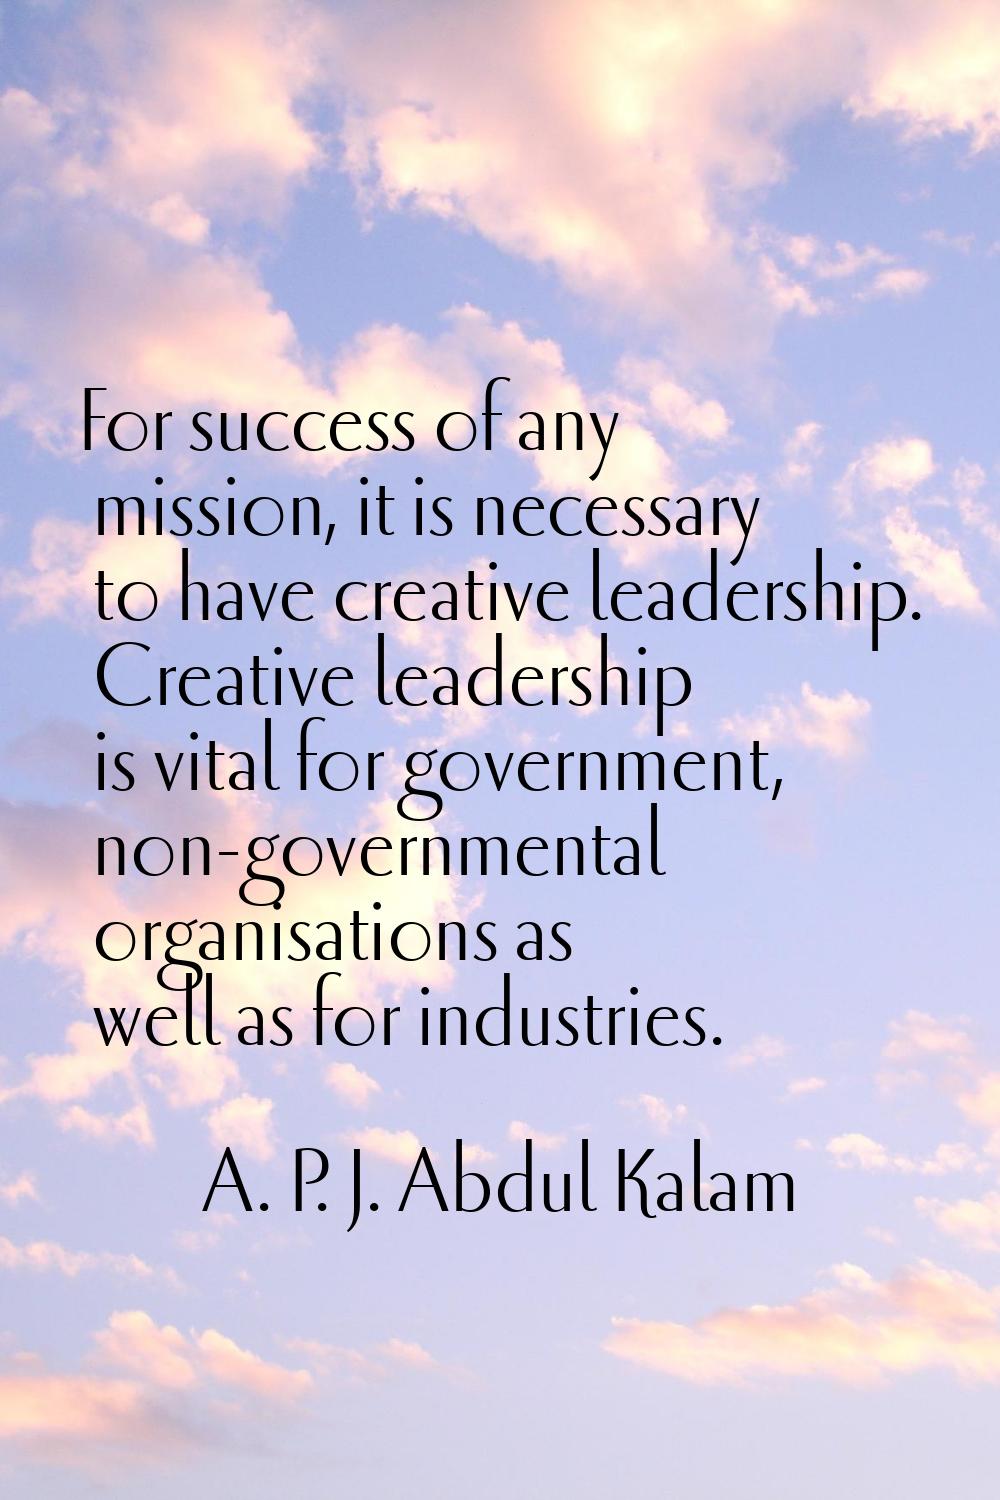 For success of any mission, it is necessary to have creative leadership. Creative leadership is vit